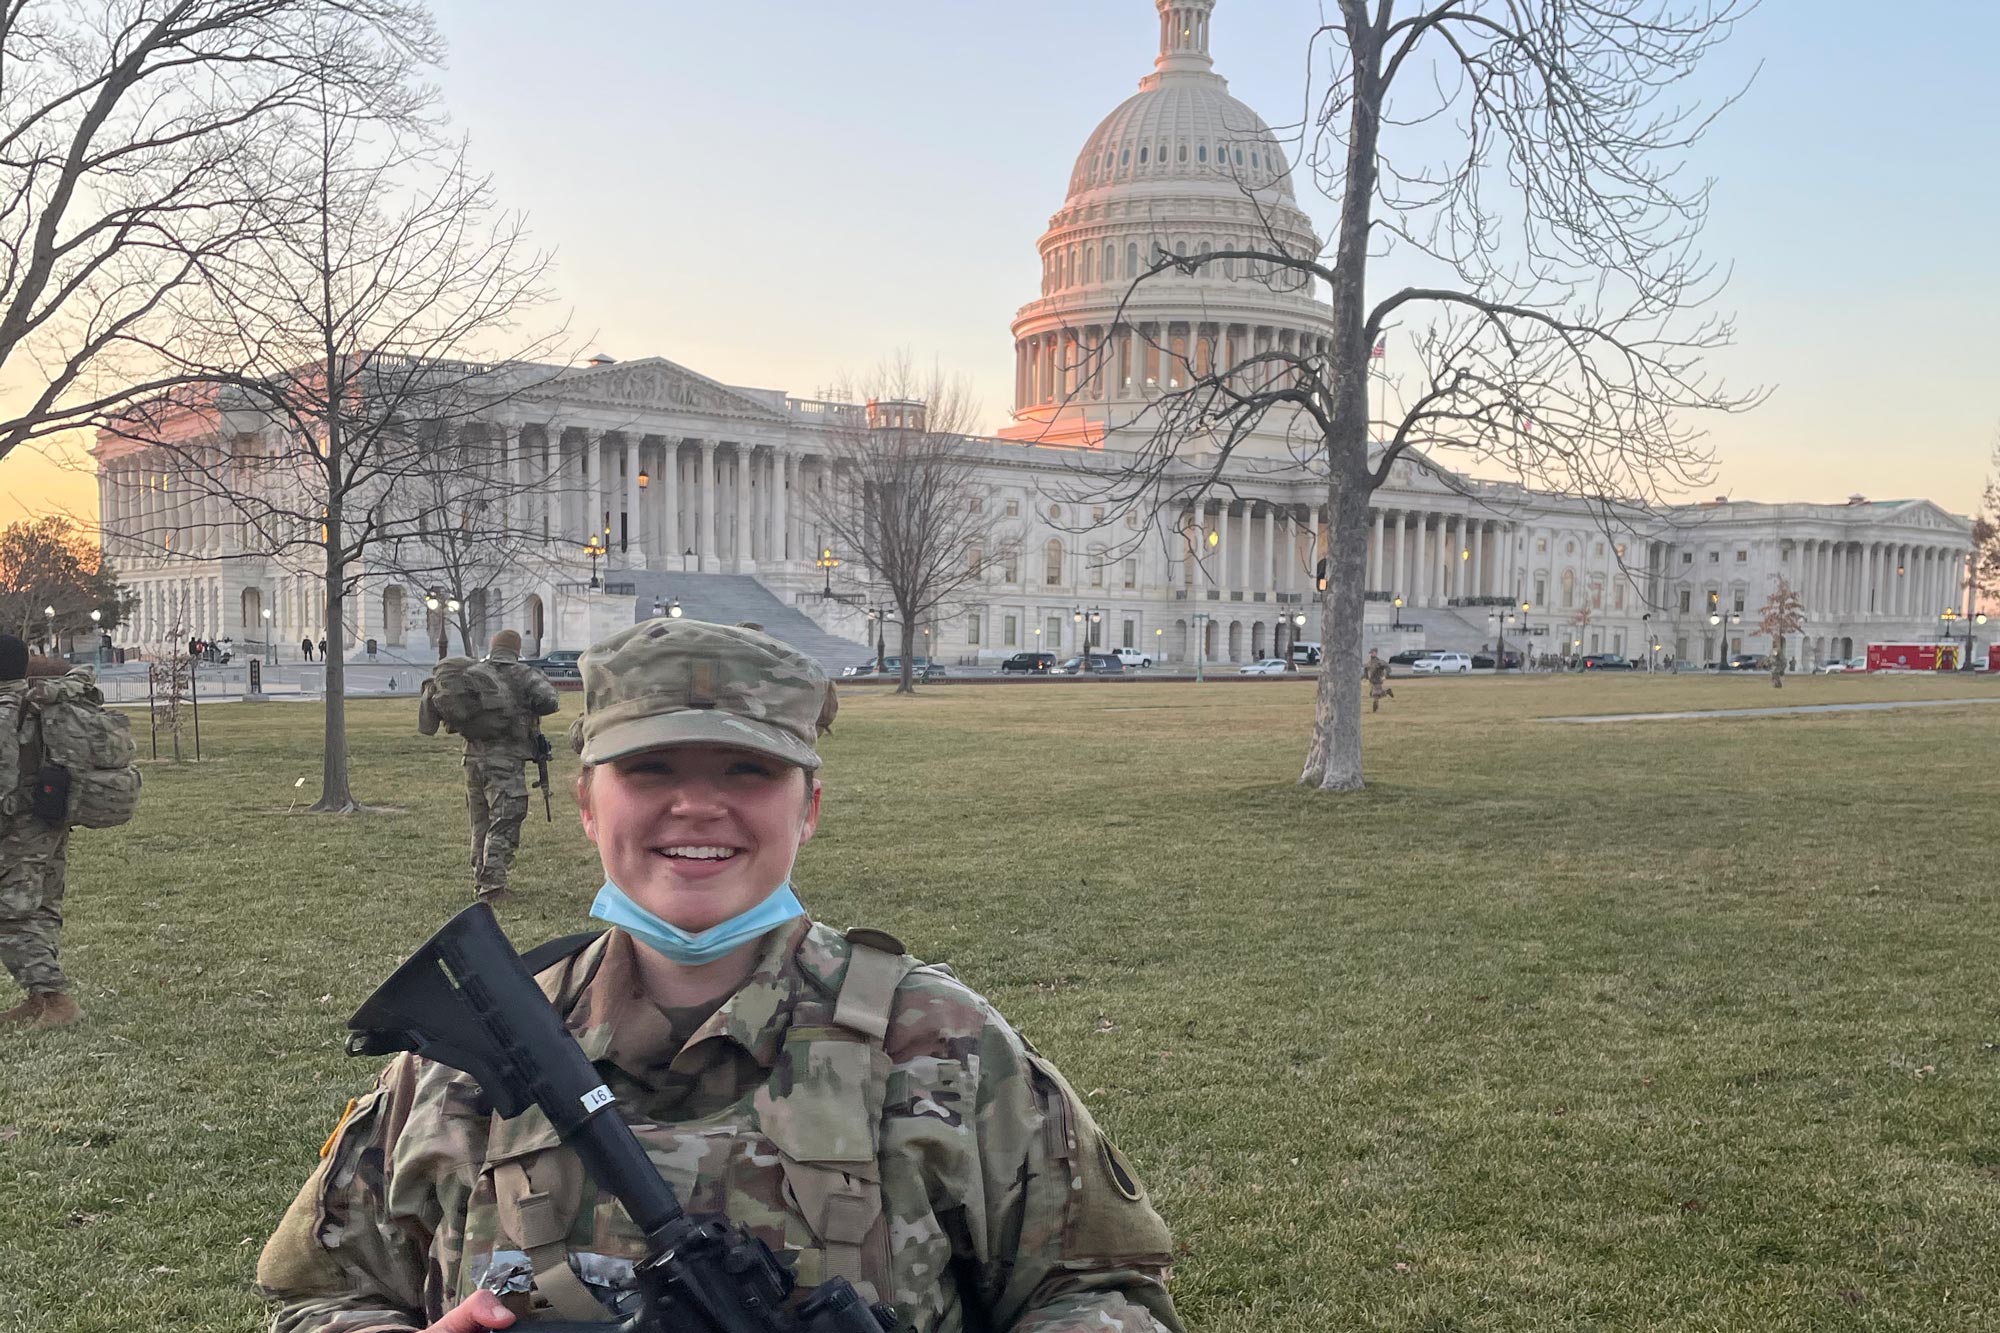 Conrad standing in front of the Capitol in her Military uniform